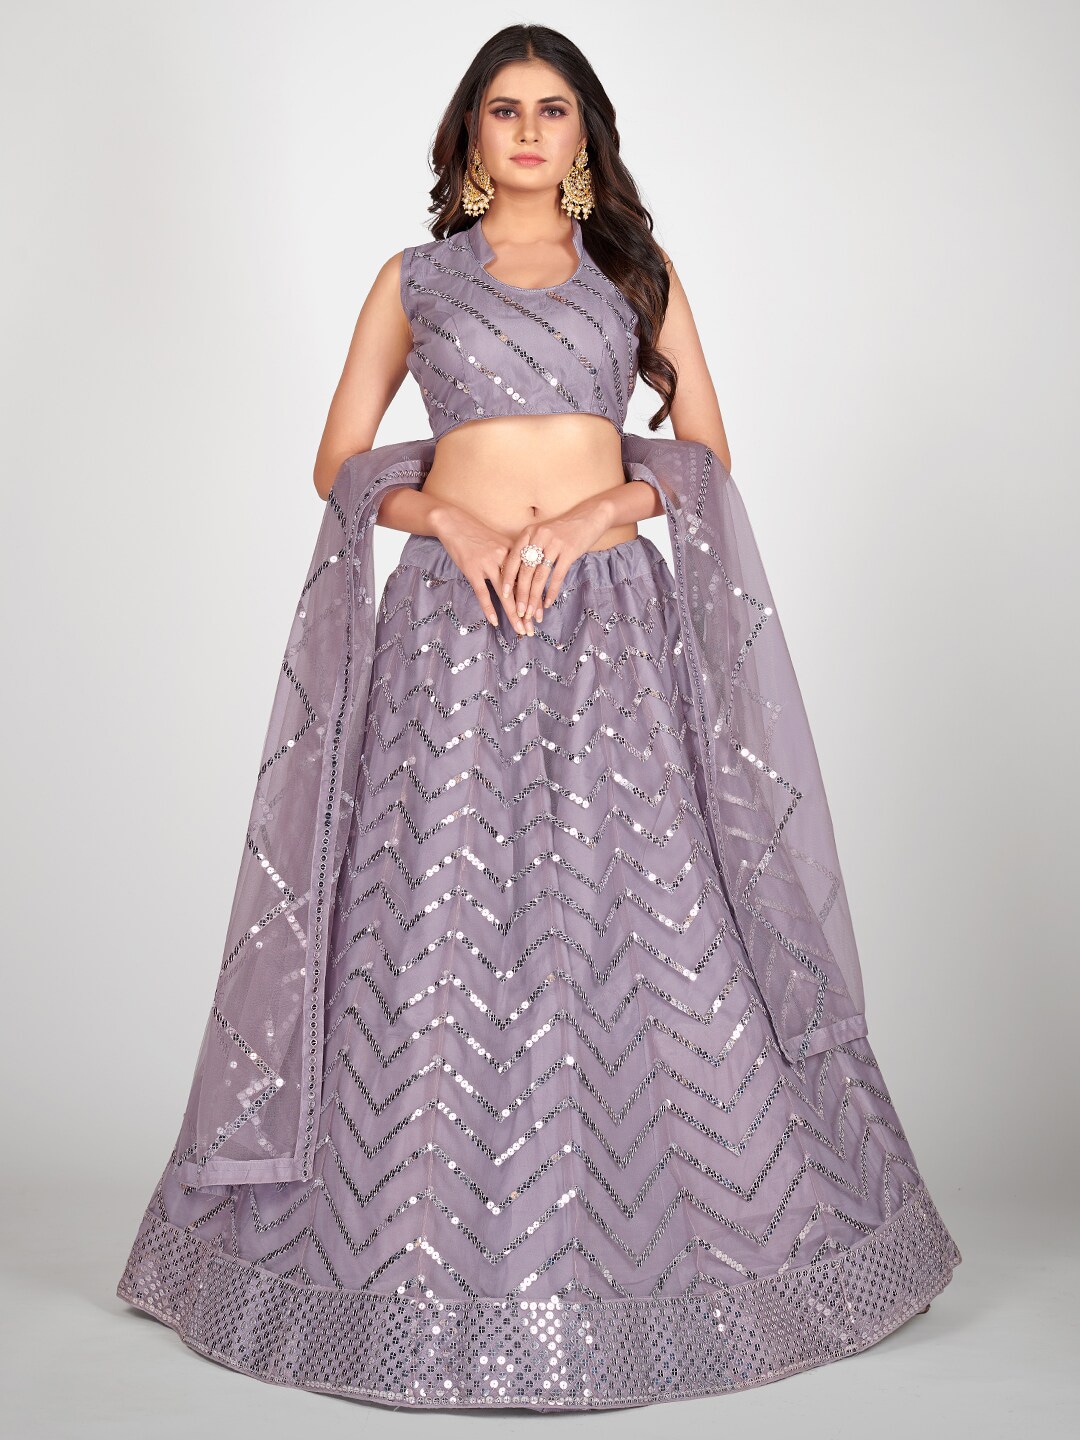 SHOPGARB Mauve Embroidered Semi-Stitched Lehenga & Unstitched Blouse With Dupatta Price in India